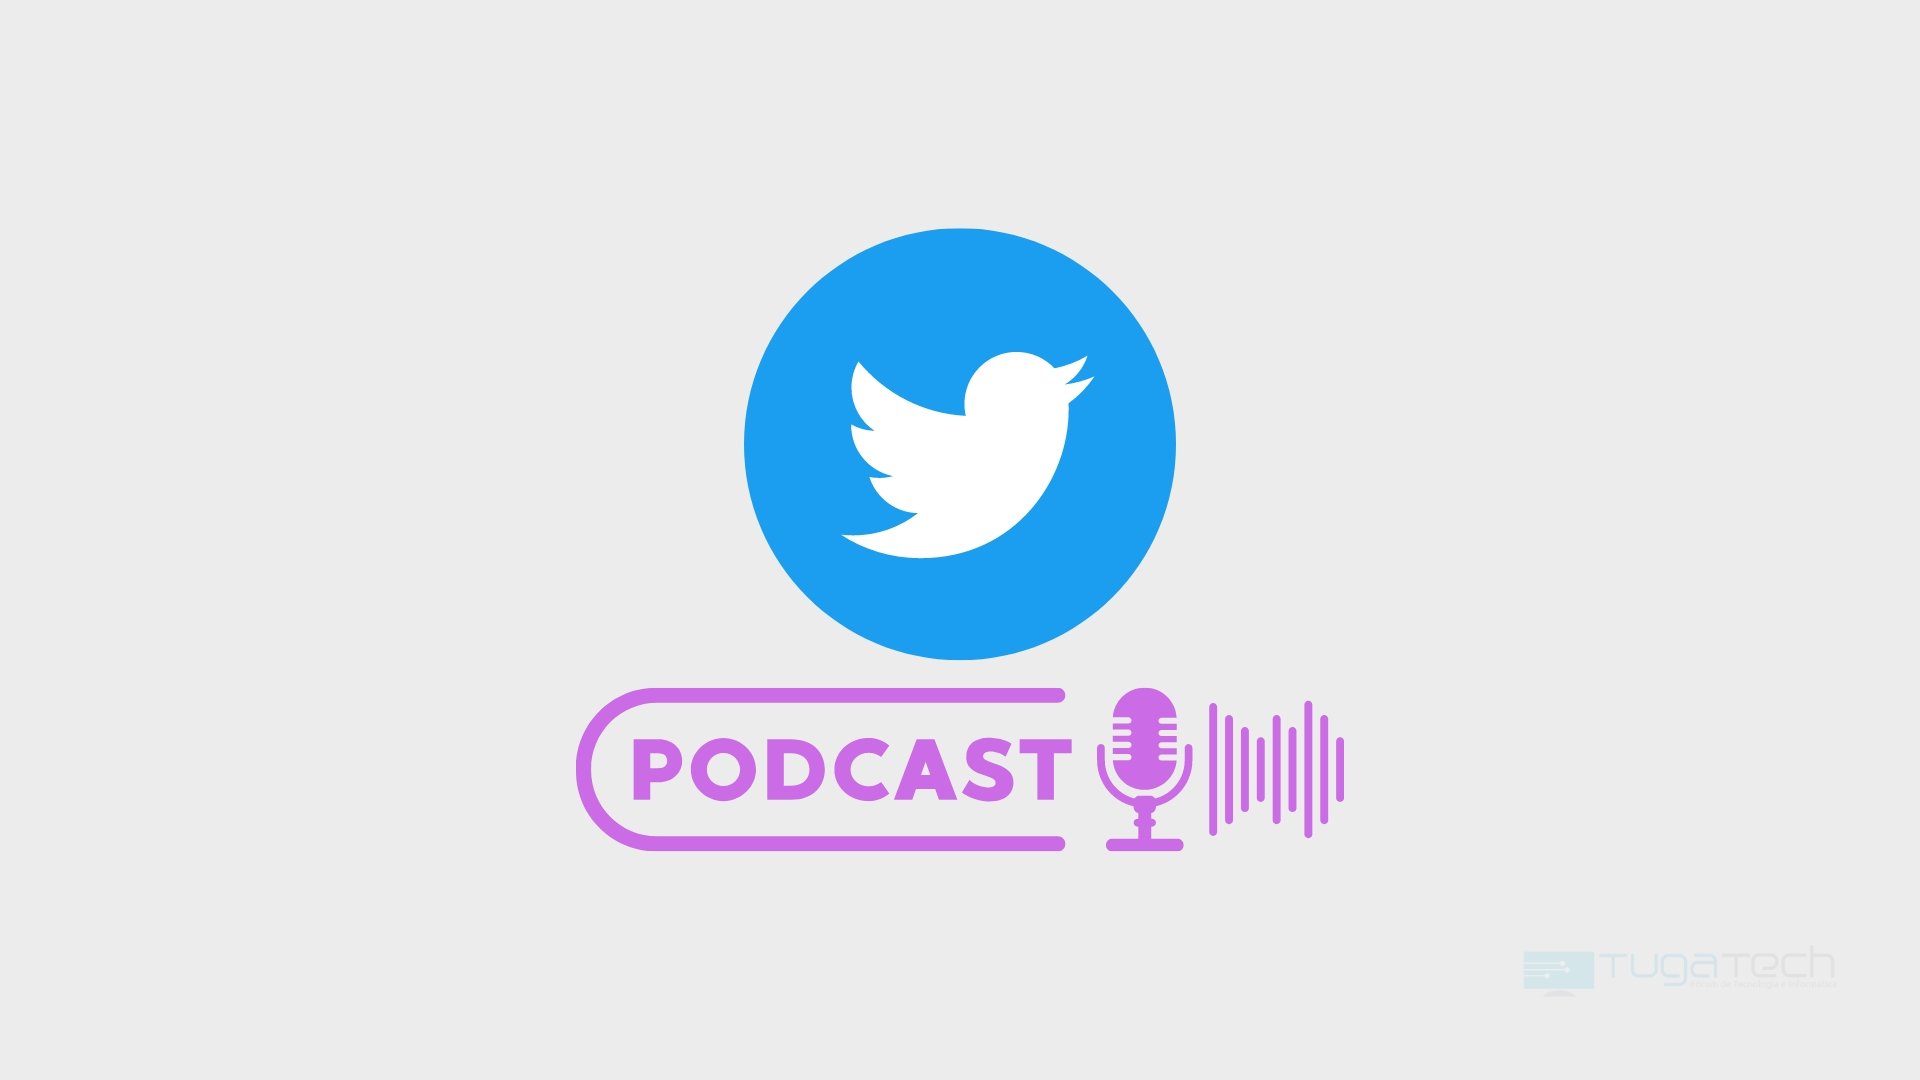 Twitter podcasts